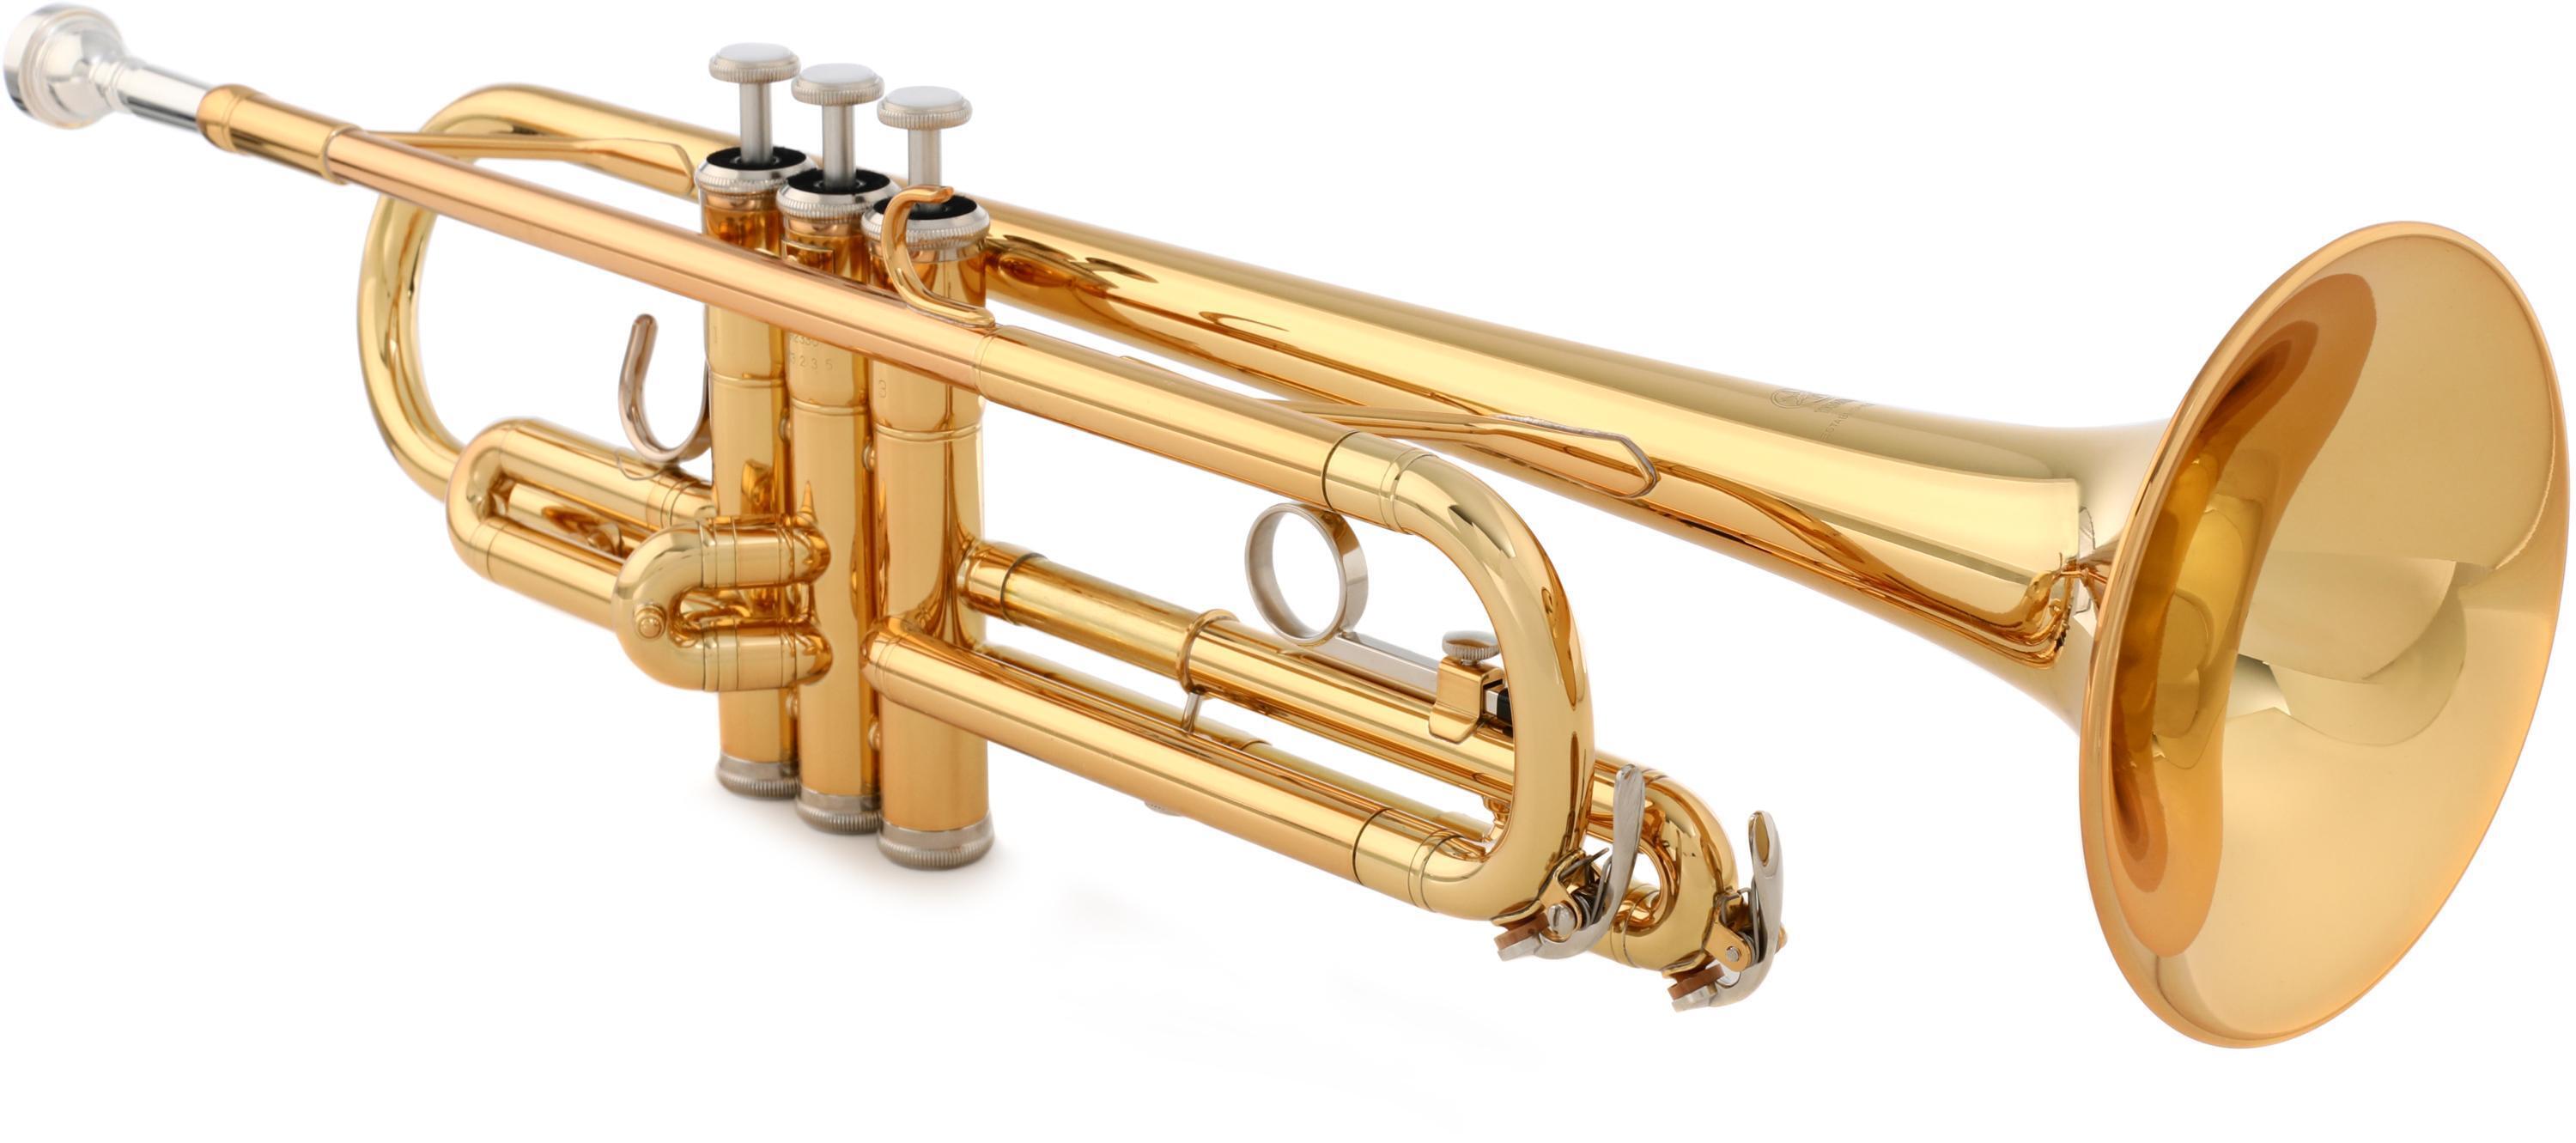 Yamaha YTR-2330 Student Bb Trumpet - Gold Lacquer